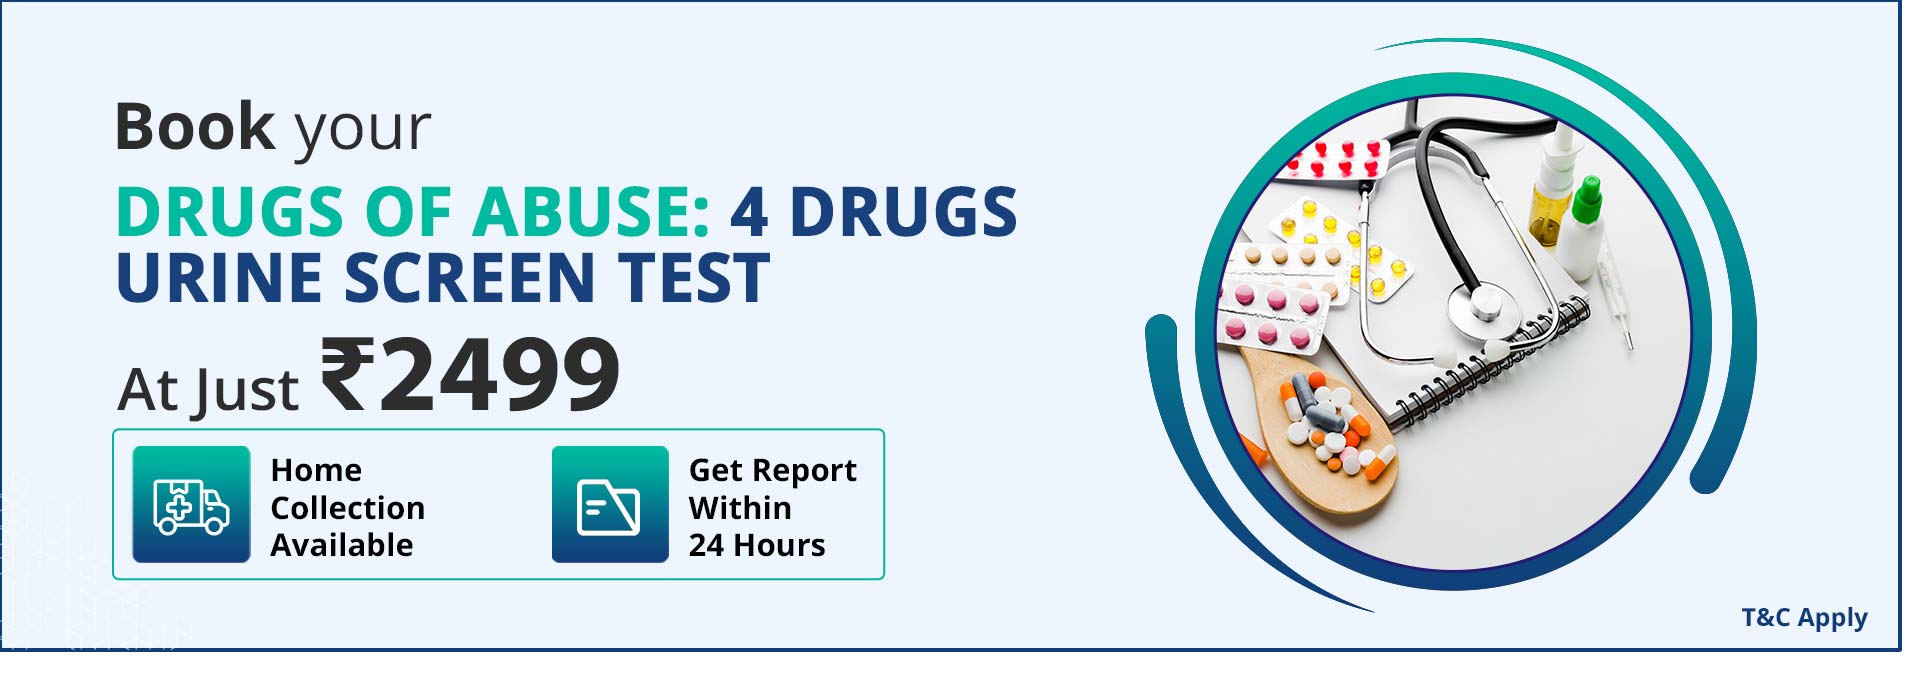 Drugs of Abuse: 4 Drugs Urine Screen Test